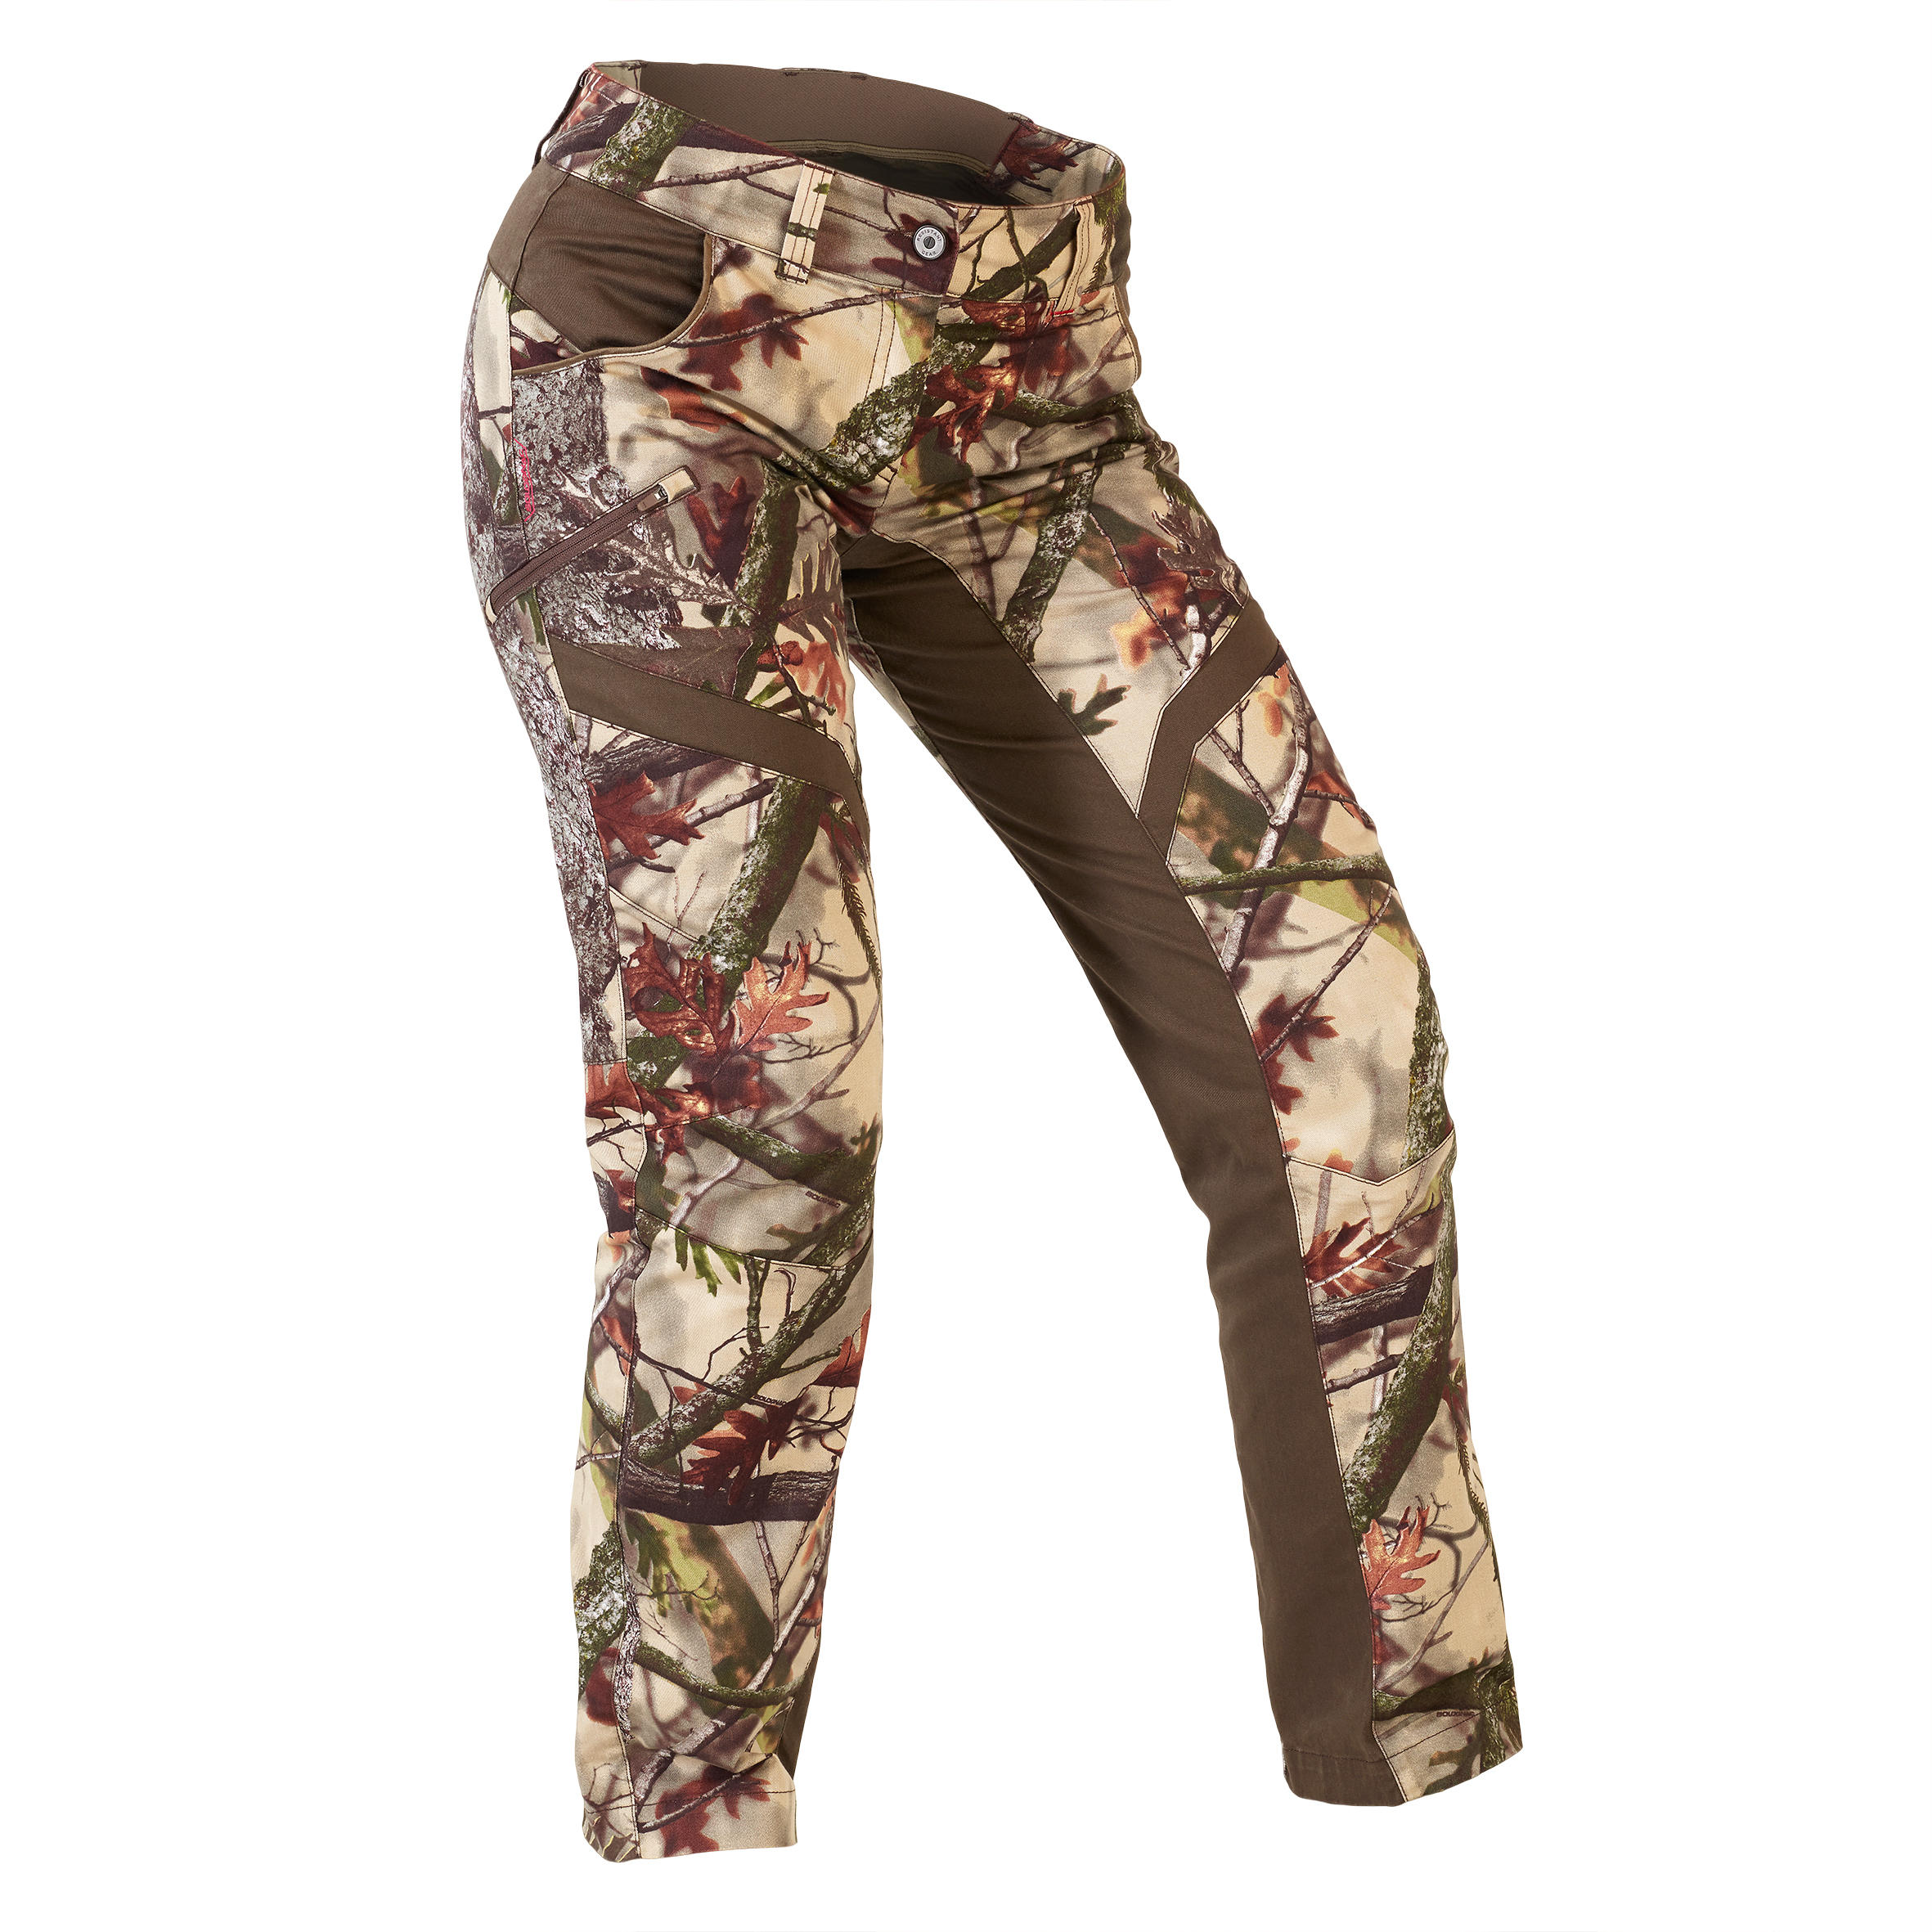 Women's Silent Breathable Trousers - Camo 2/7